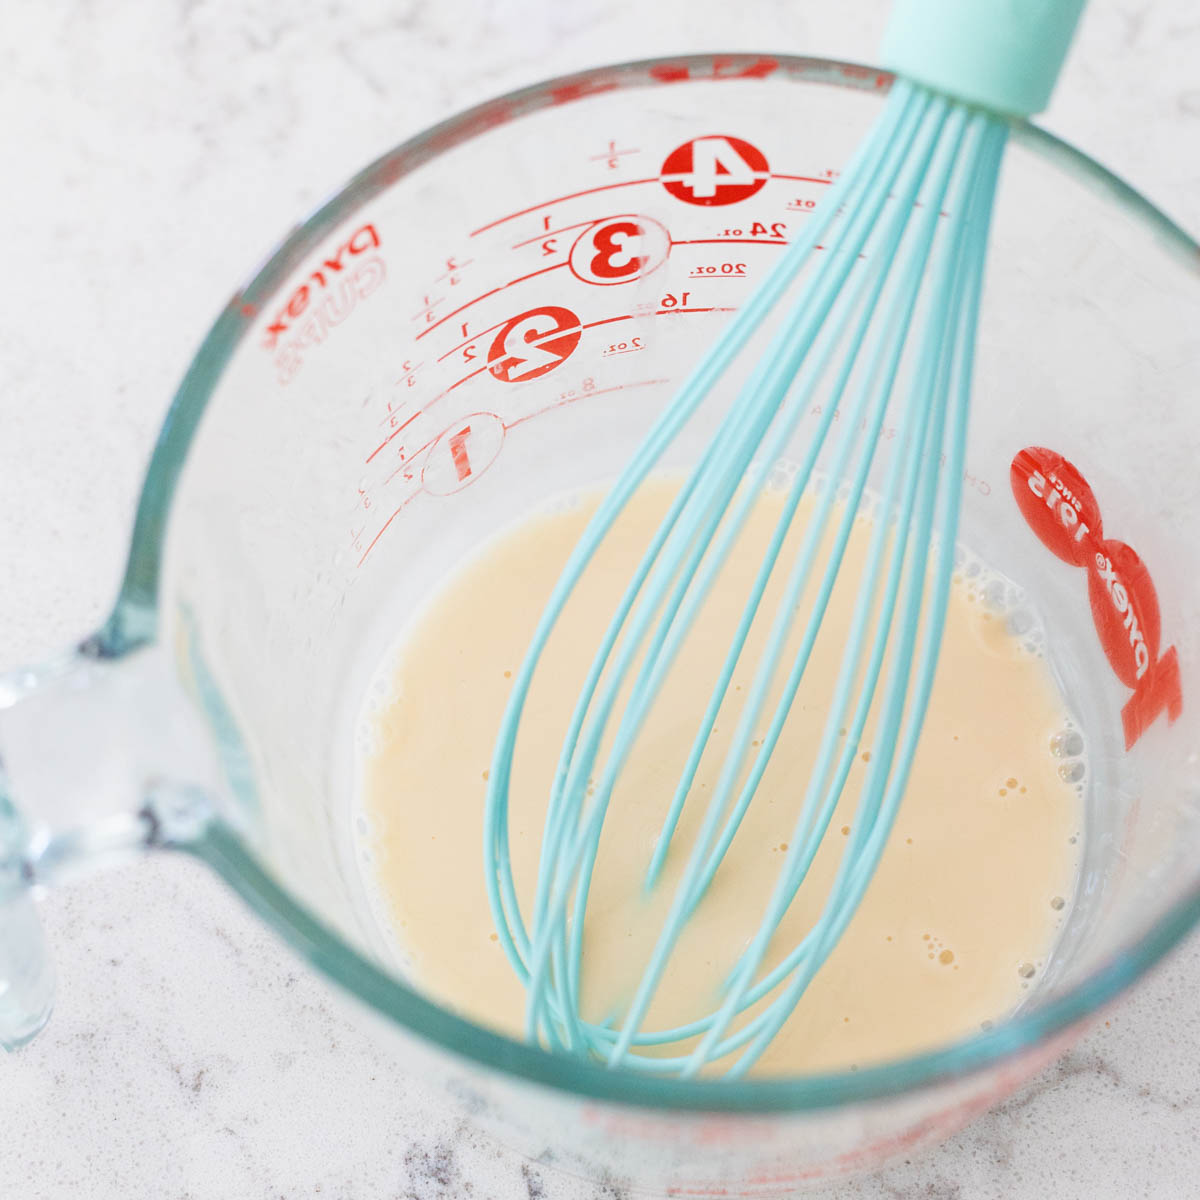 The bourbon and cornstarch have been whisked together and are creamy and smooth.